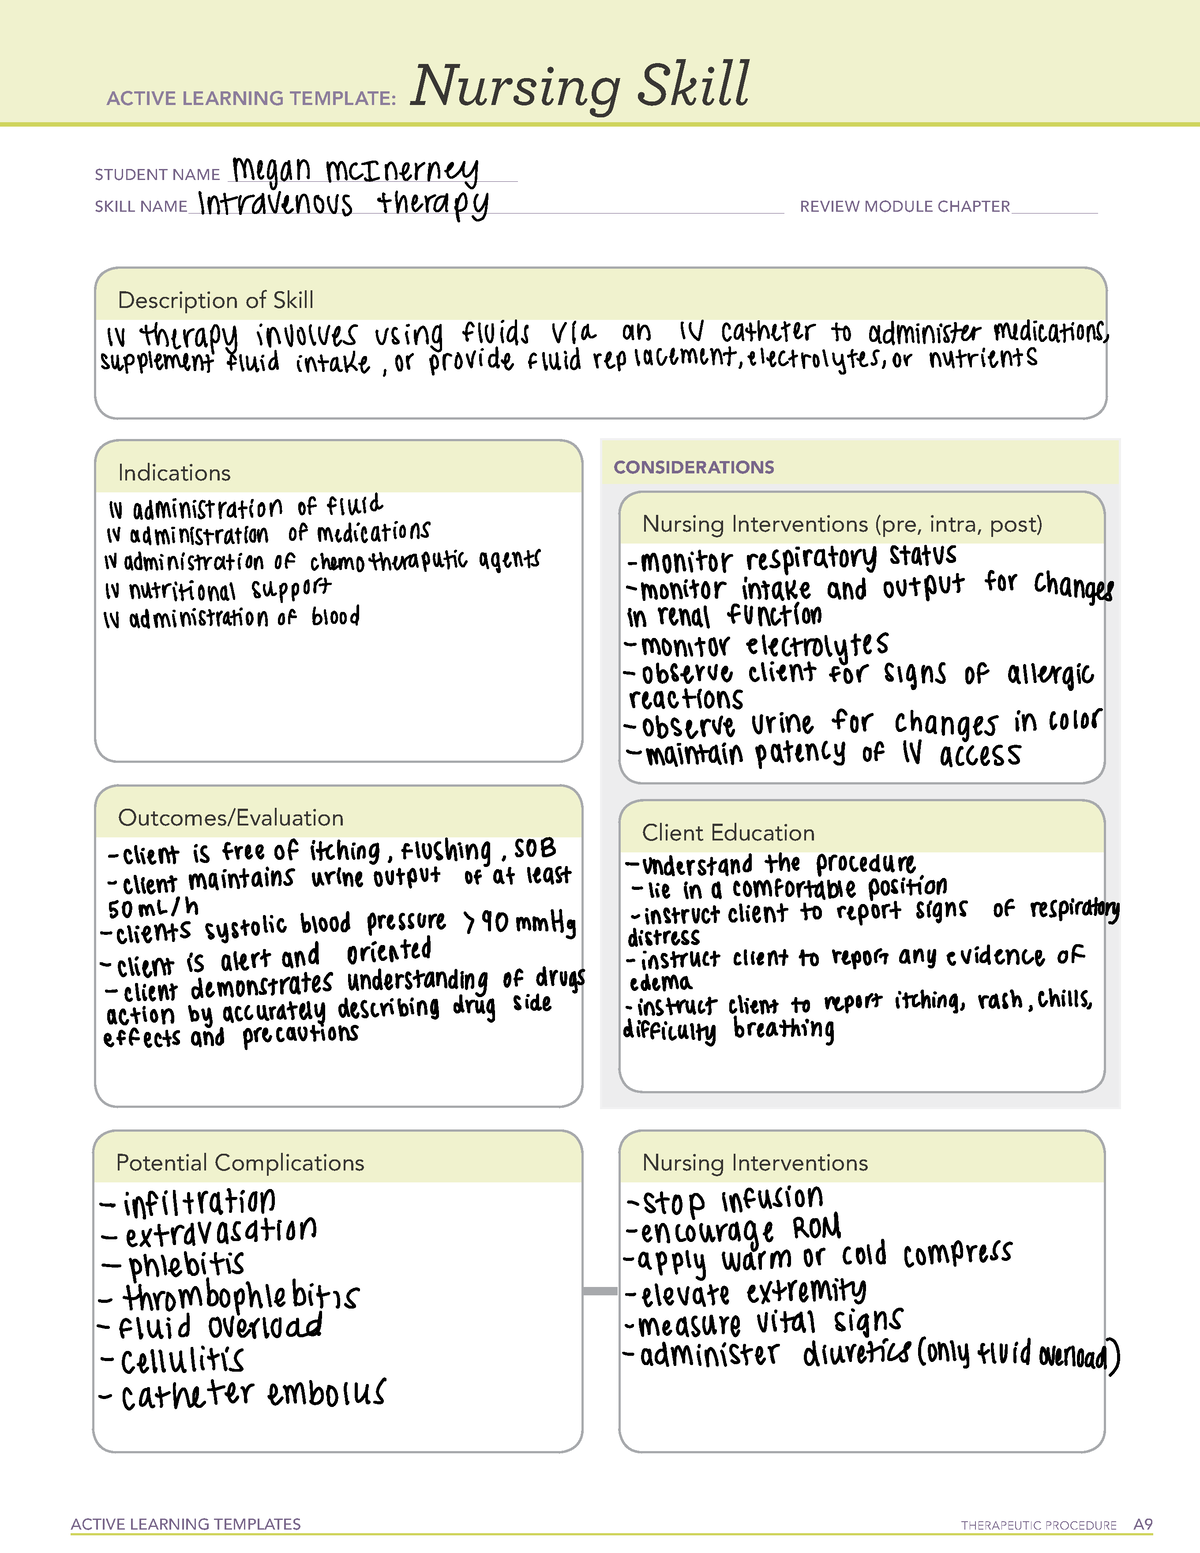 Active Learning Template IV Therapy ACTIVE LEARNING TEMPLATES THERAPEUTIC PROCEDURE A Nursing